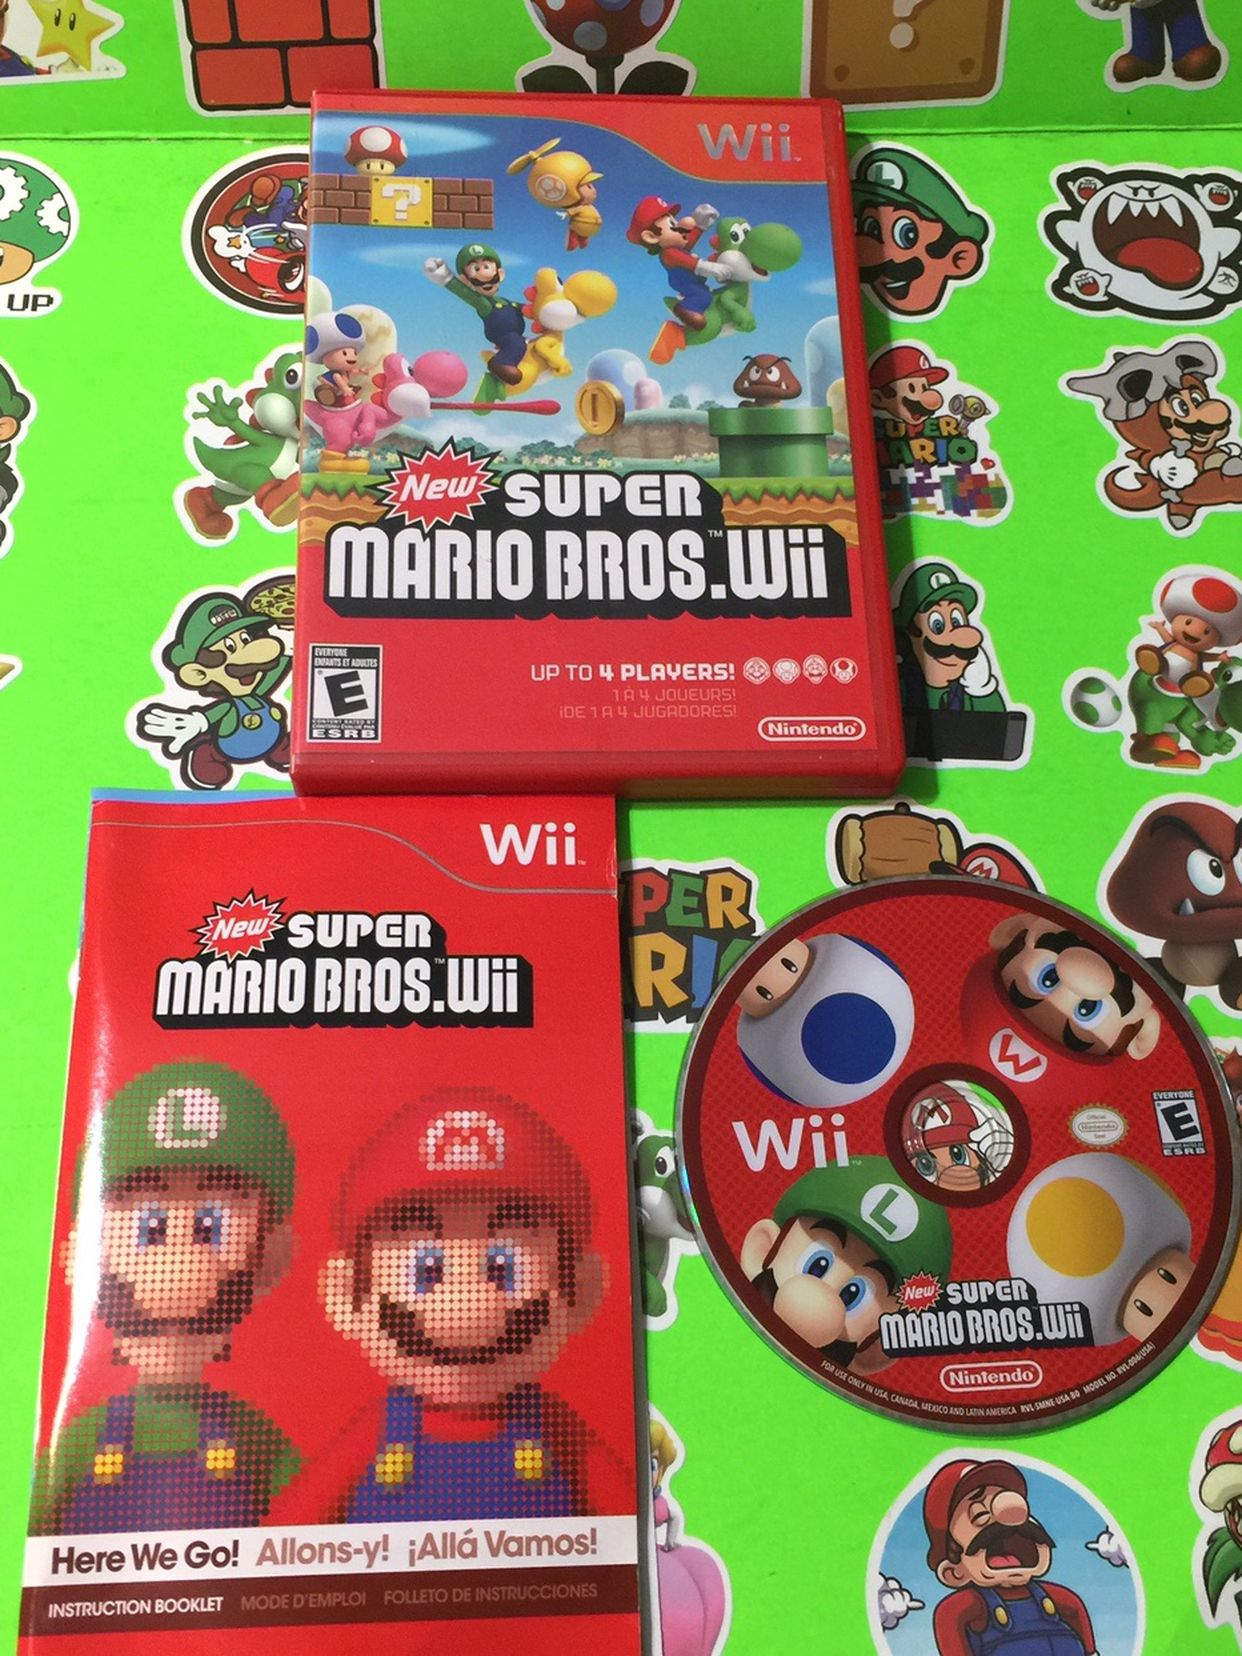 Wii Super Mario Bros Like New buy with confidence 5 🌟⭐️⭐️⭐️⭐️seller all games have been tested